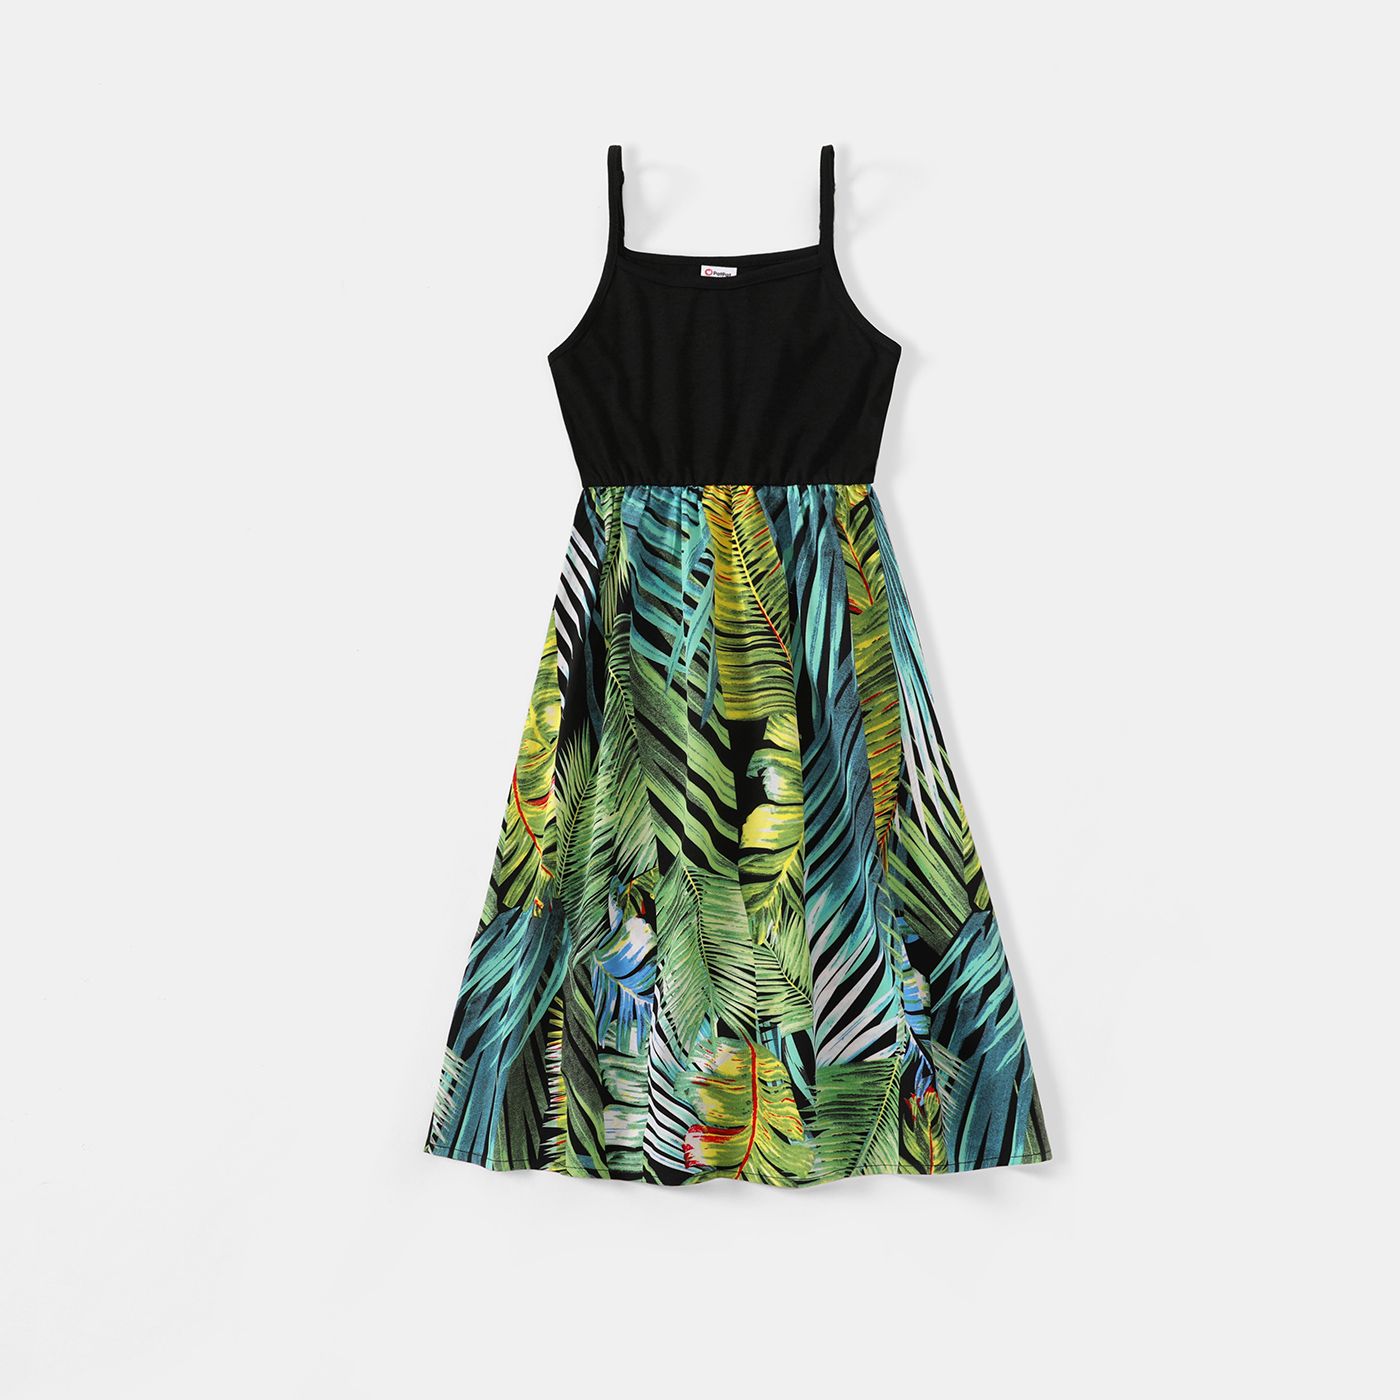 Family Matching Allover Tropical Plant Print Spliced Black Cami Dresses And Short-sleeve Tops Sets